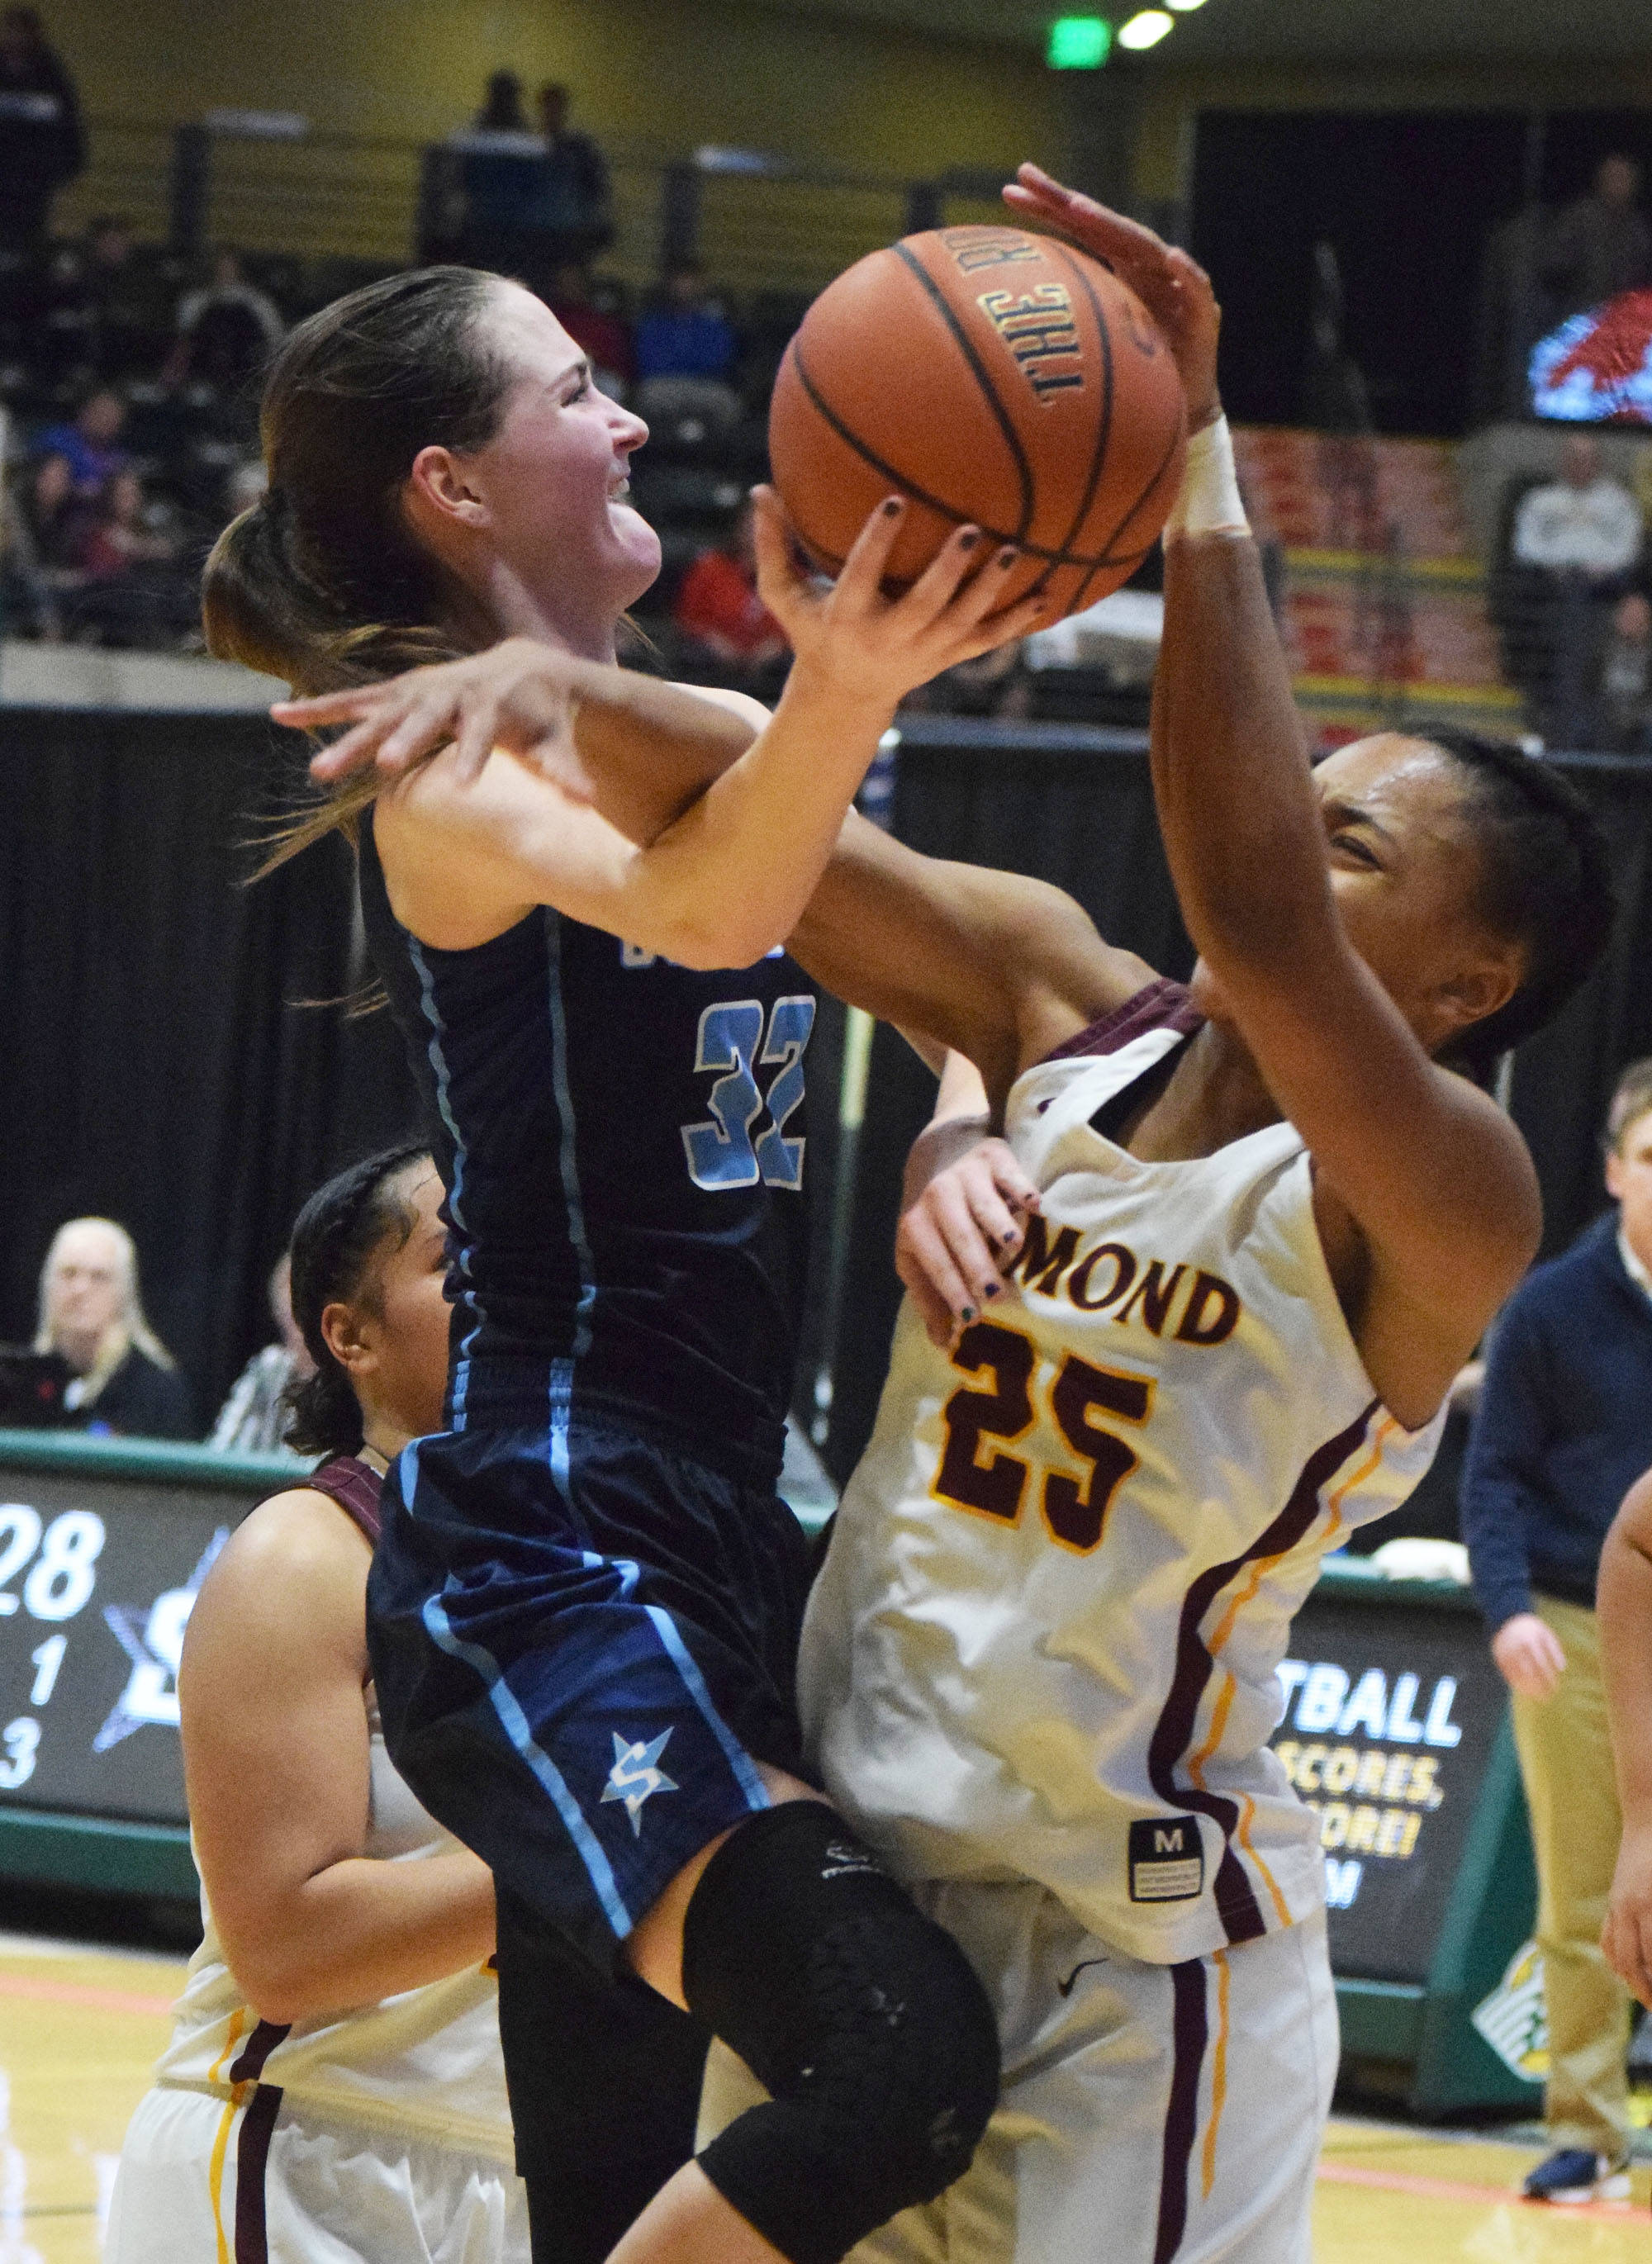 Soldotna’s Danica Schmidt receives a block from Dimond’s Ahvionn Rabb Friday, March 22, 2019, in the Class 4A state basketball tournament at the Alaska Airlines Center in Anchorage. (Photo by Joey Klecka/Peninsula Clarion)